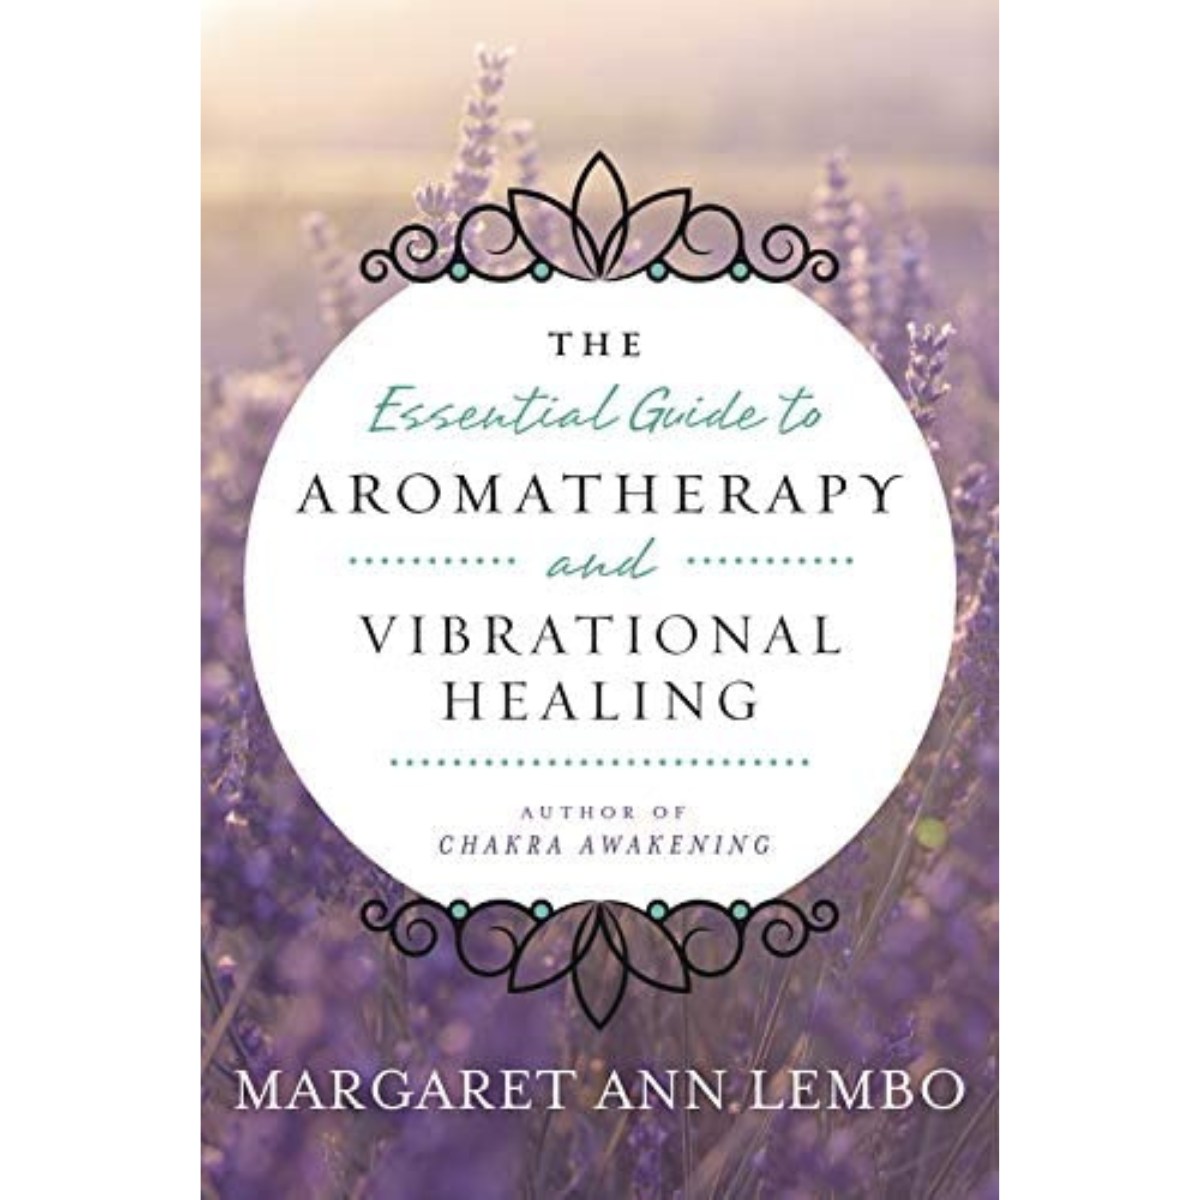 Essential Guide to Aromatherapy and Vibrational Healing, The